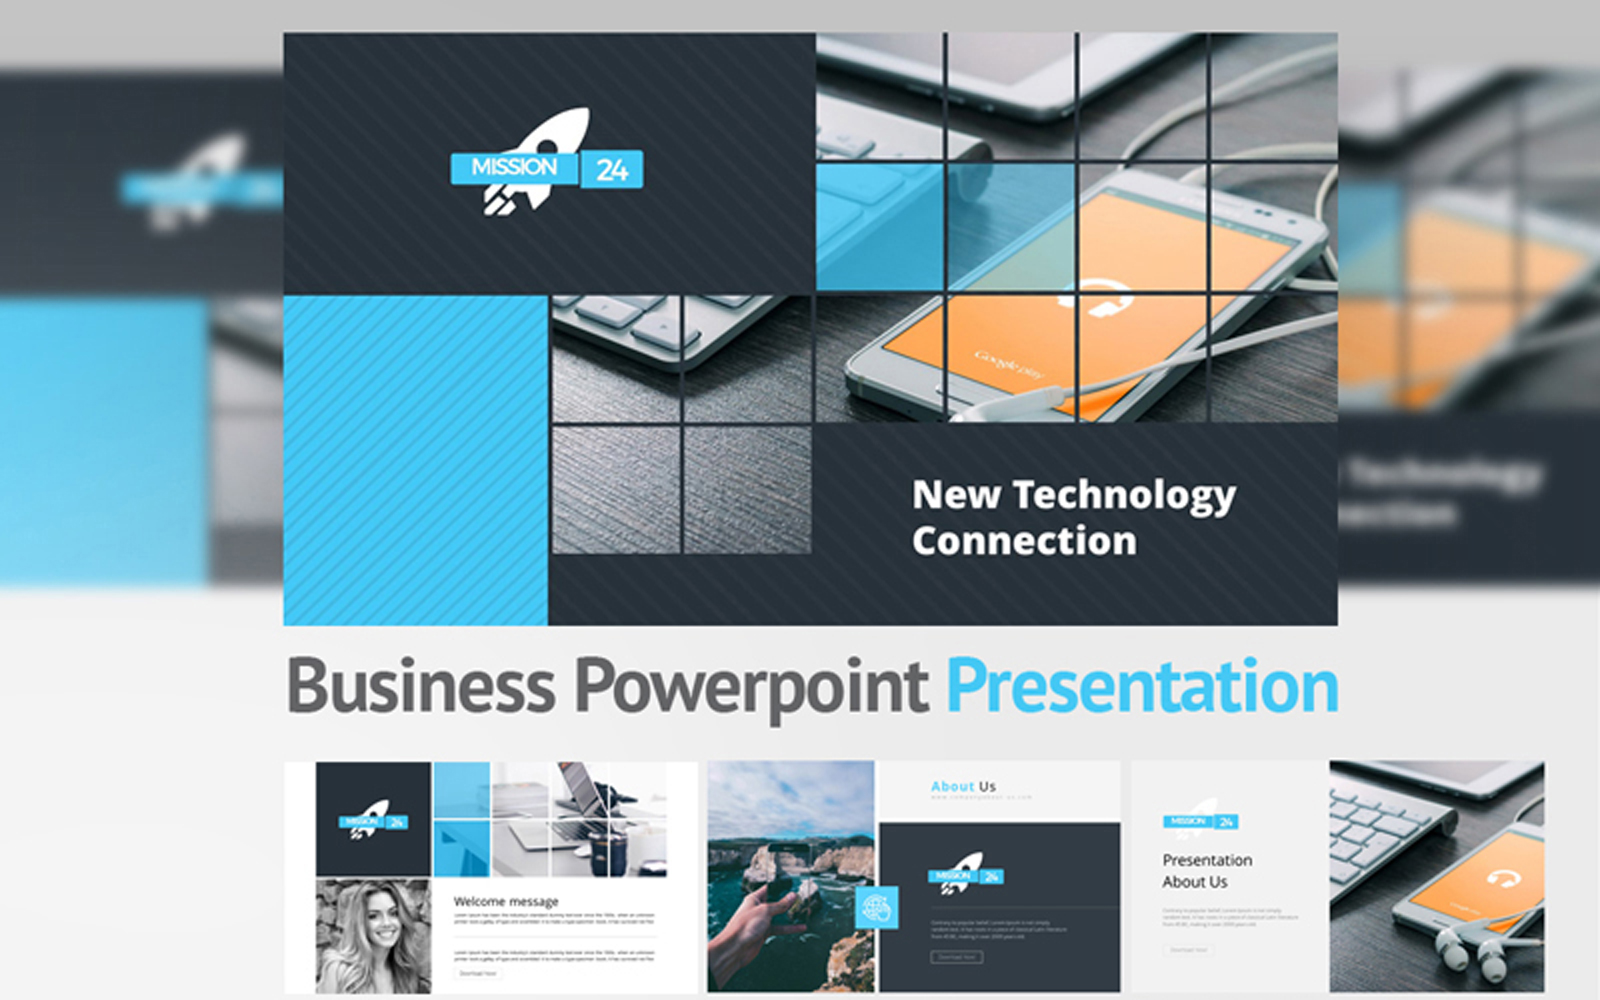 Mission 24 PowerPoint template